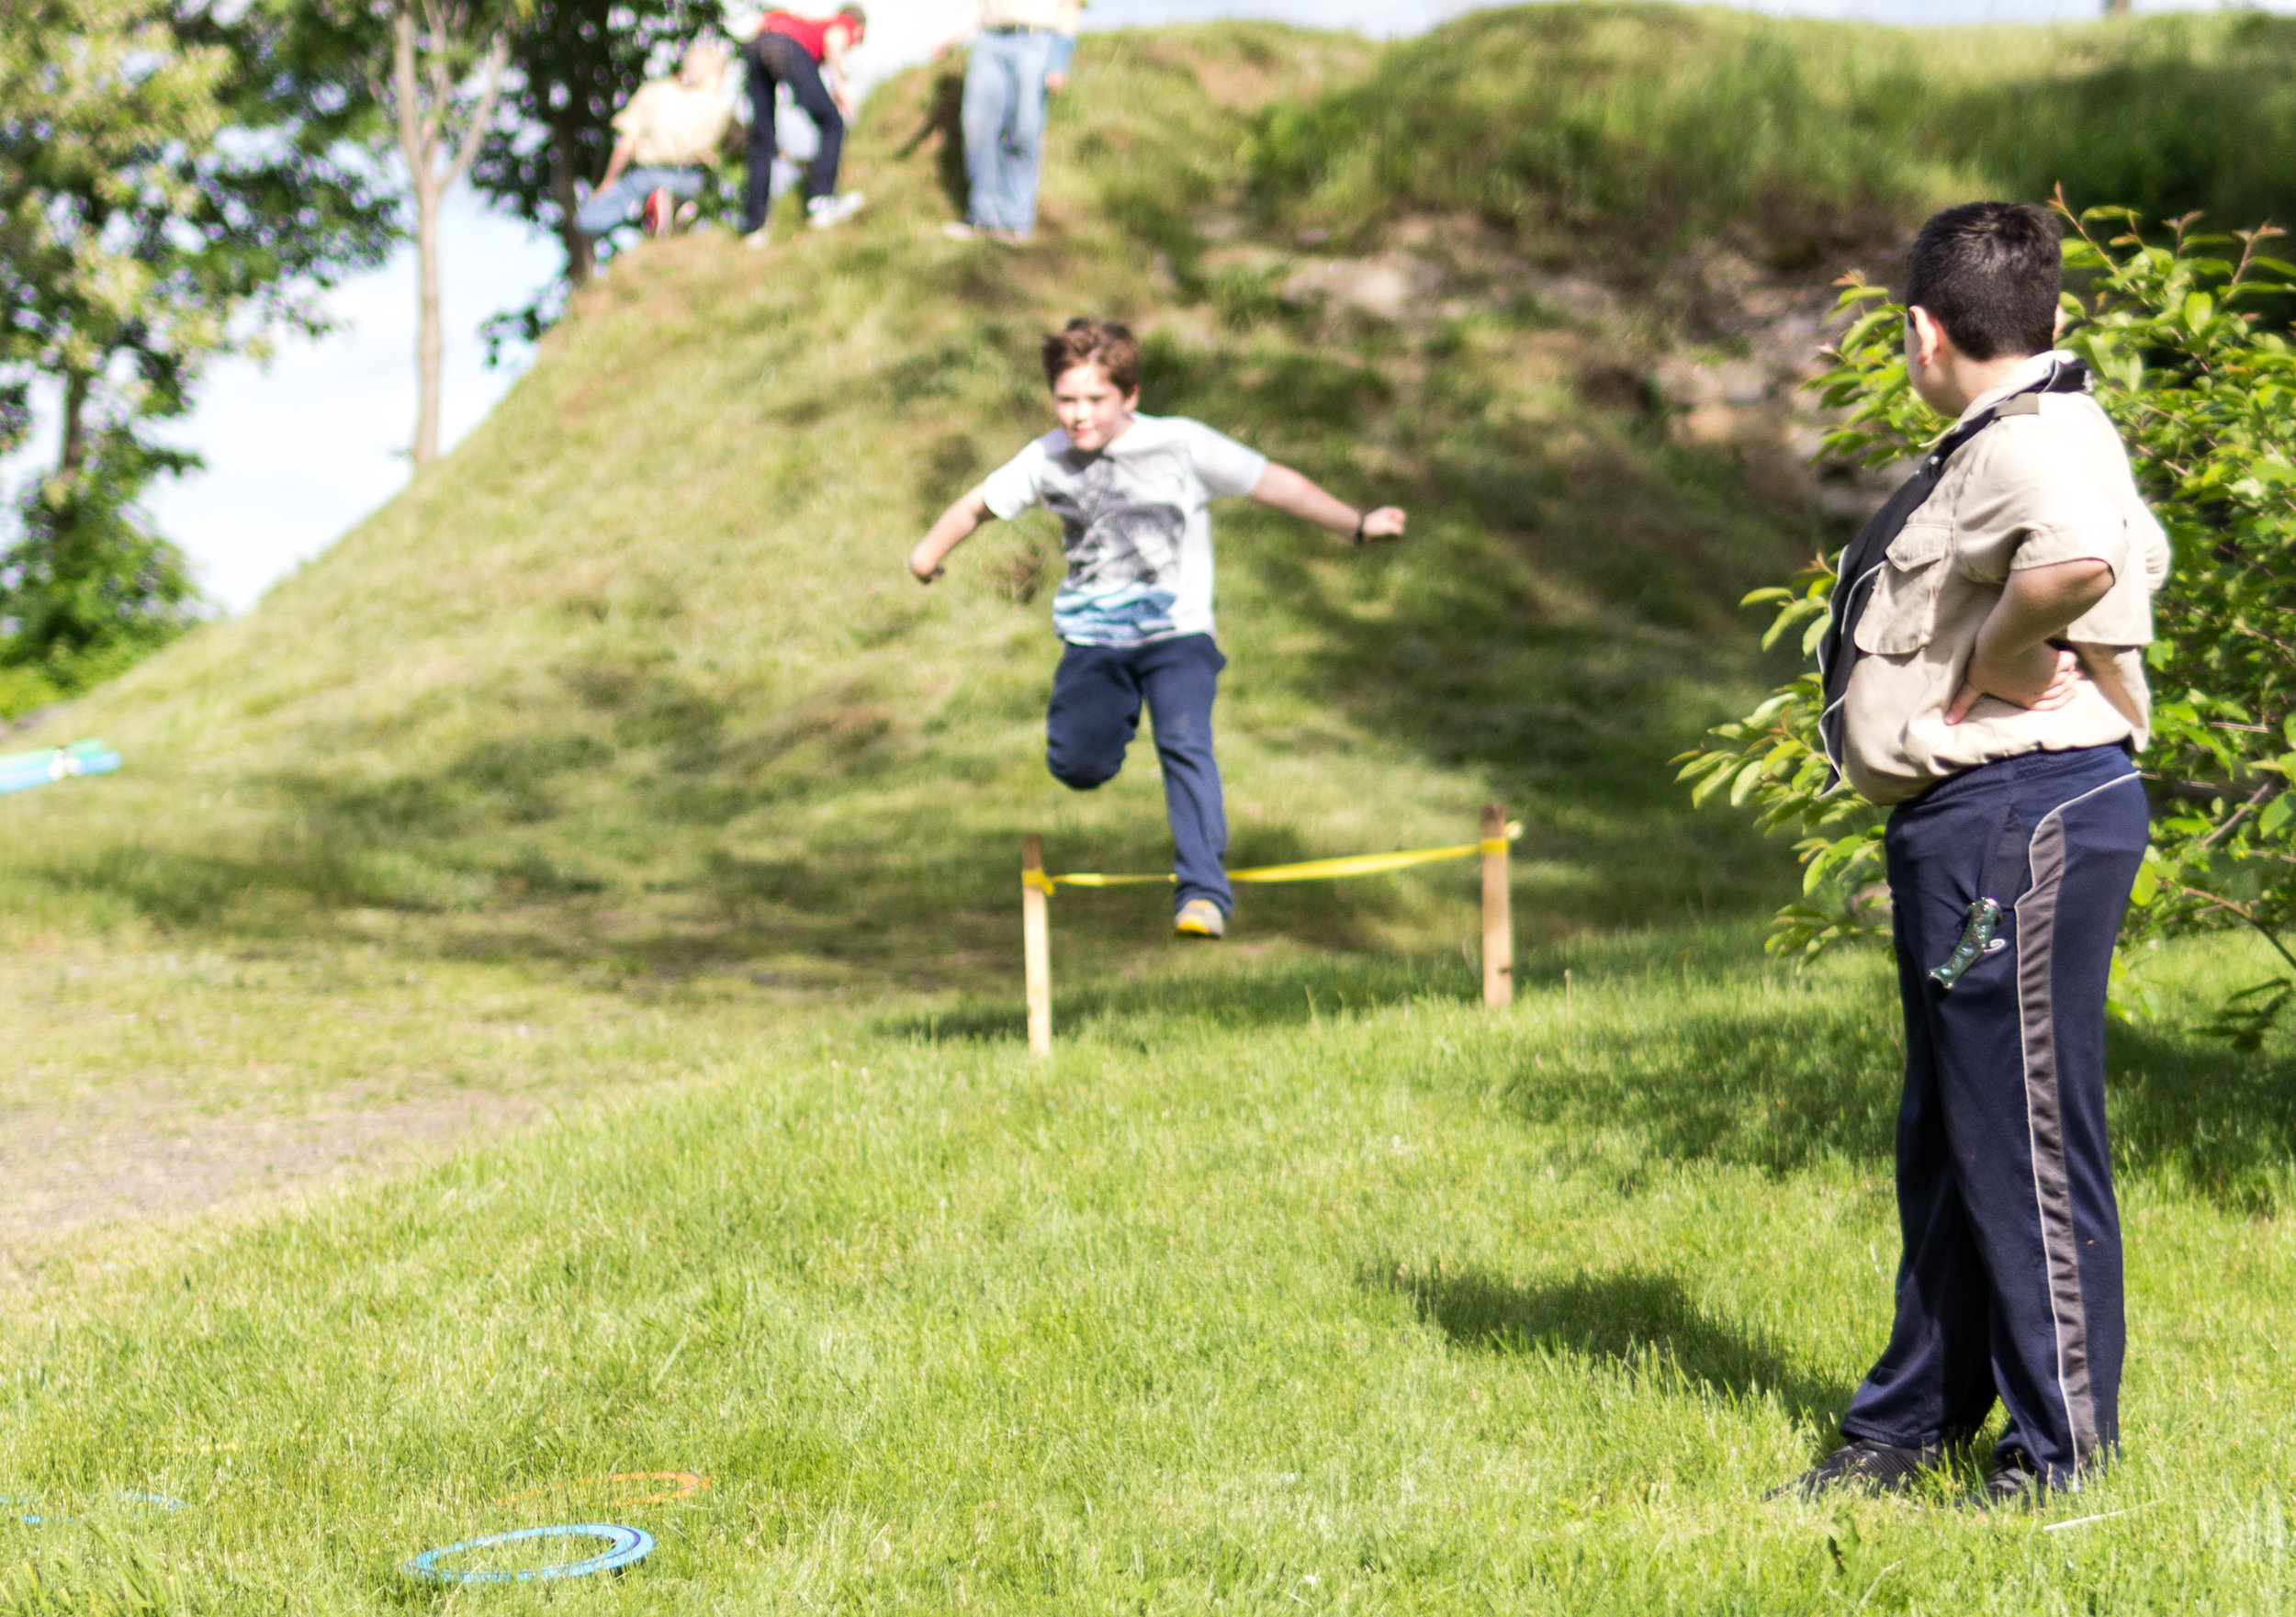 Cub Scouts Obstacle Course_15.jpg